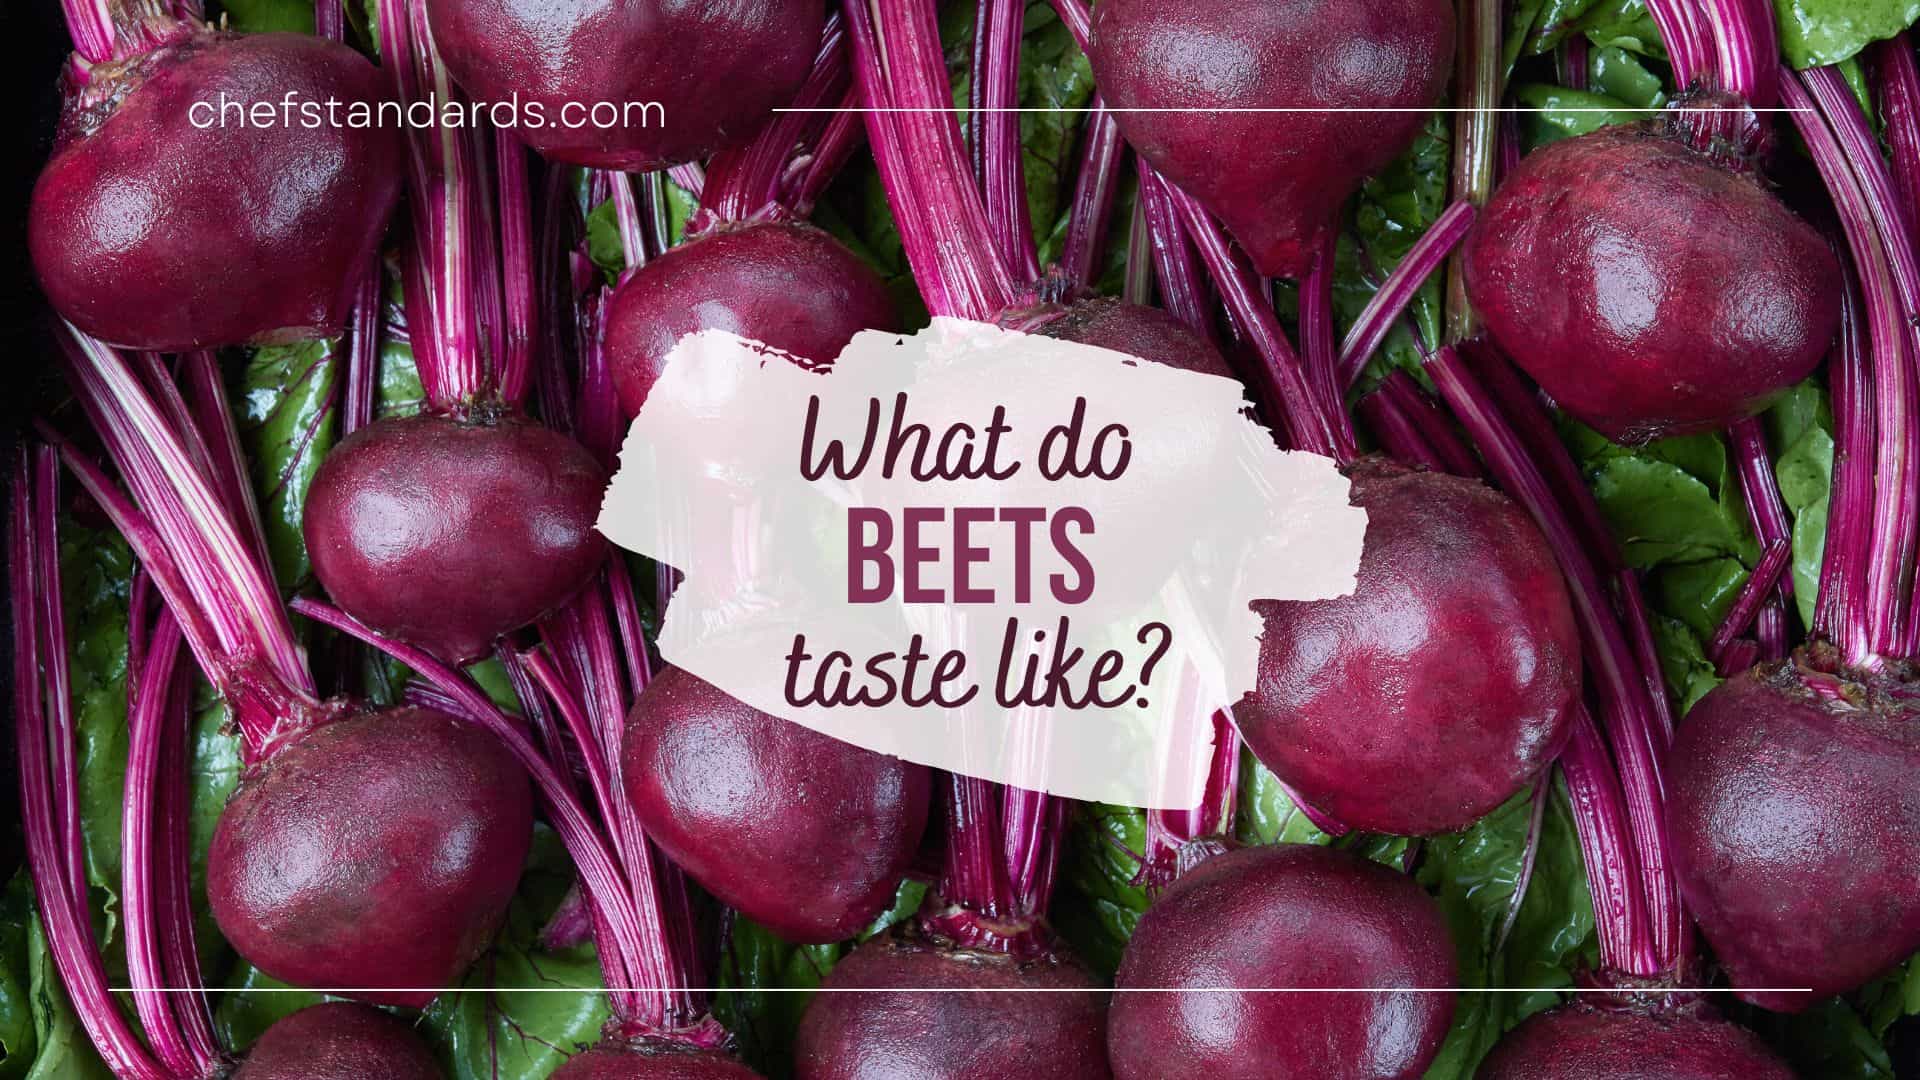 the taste of beets